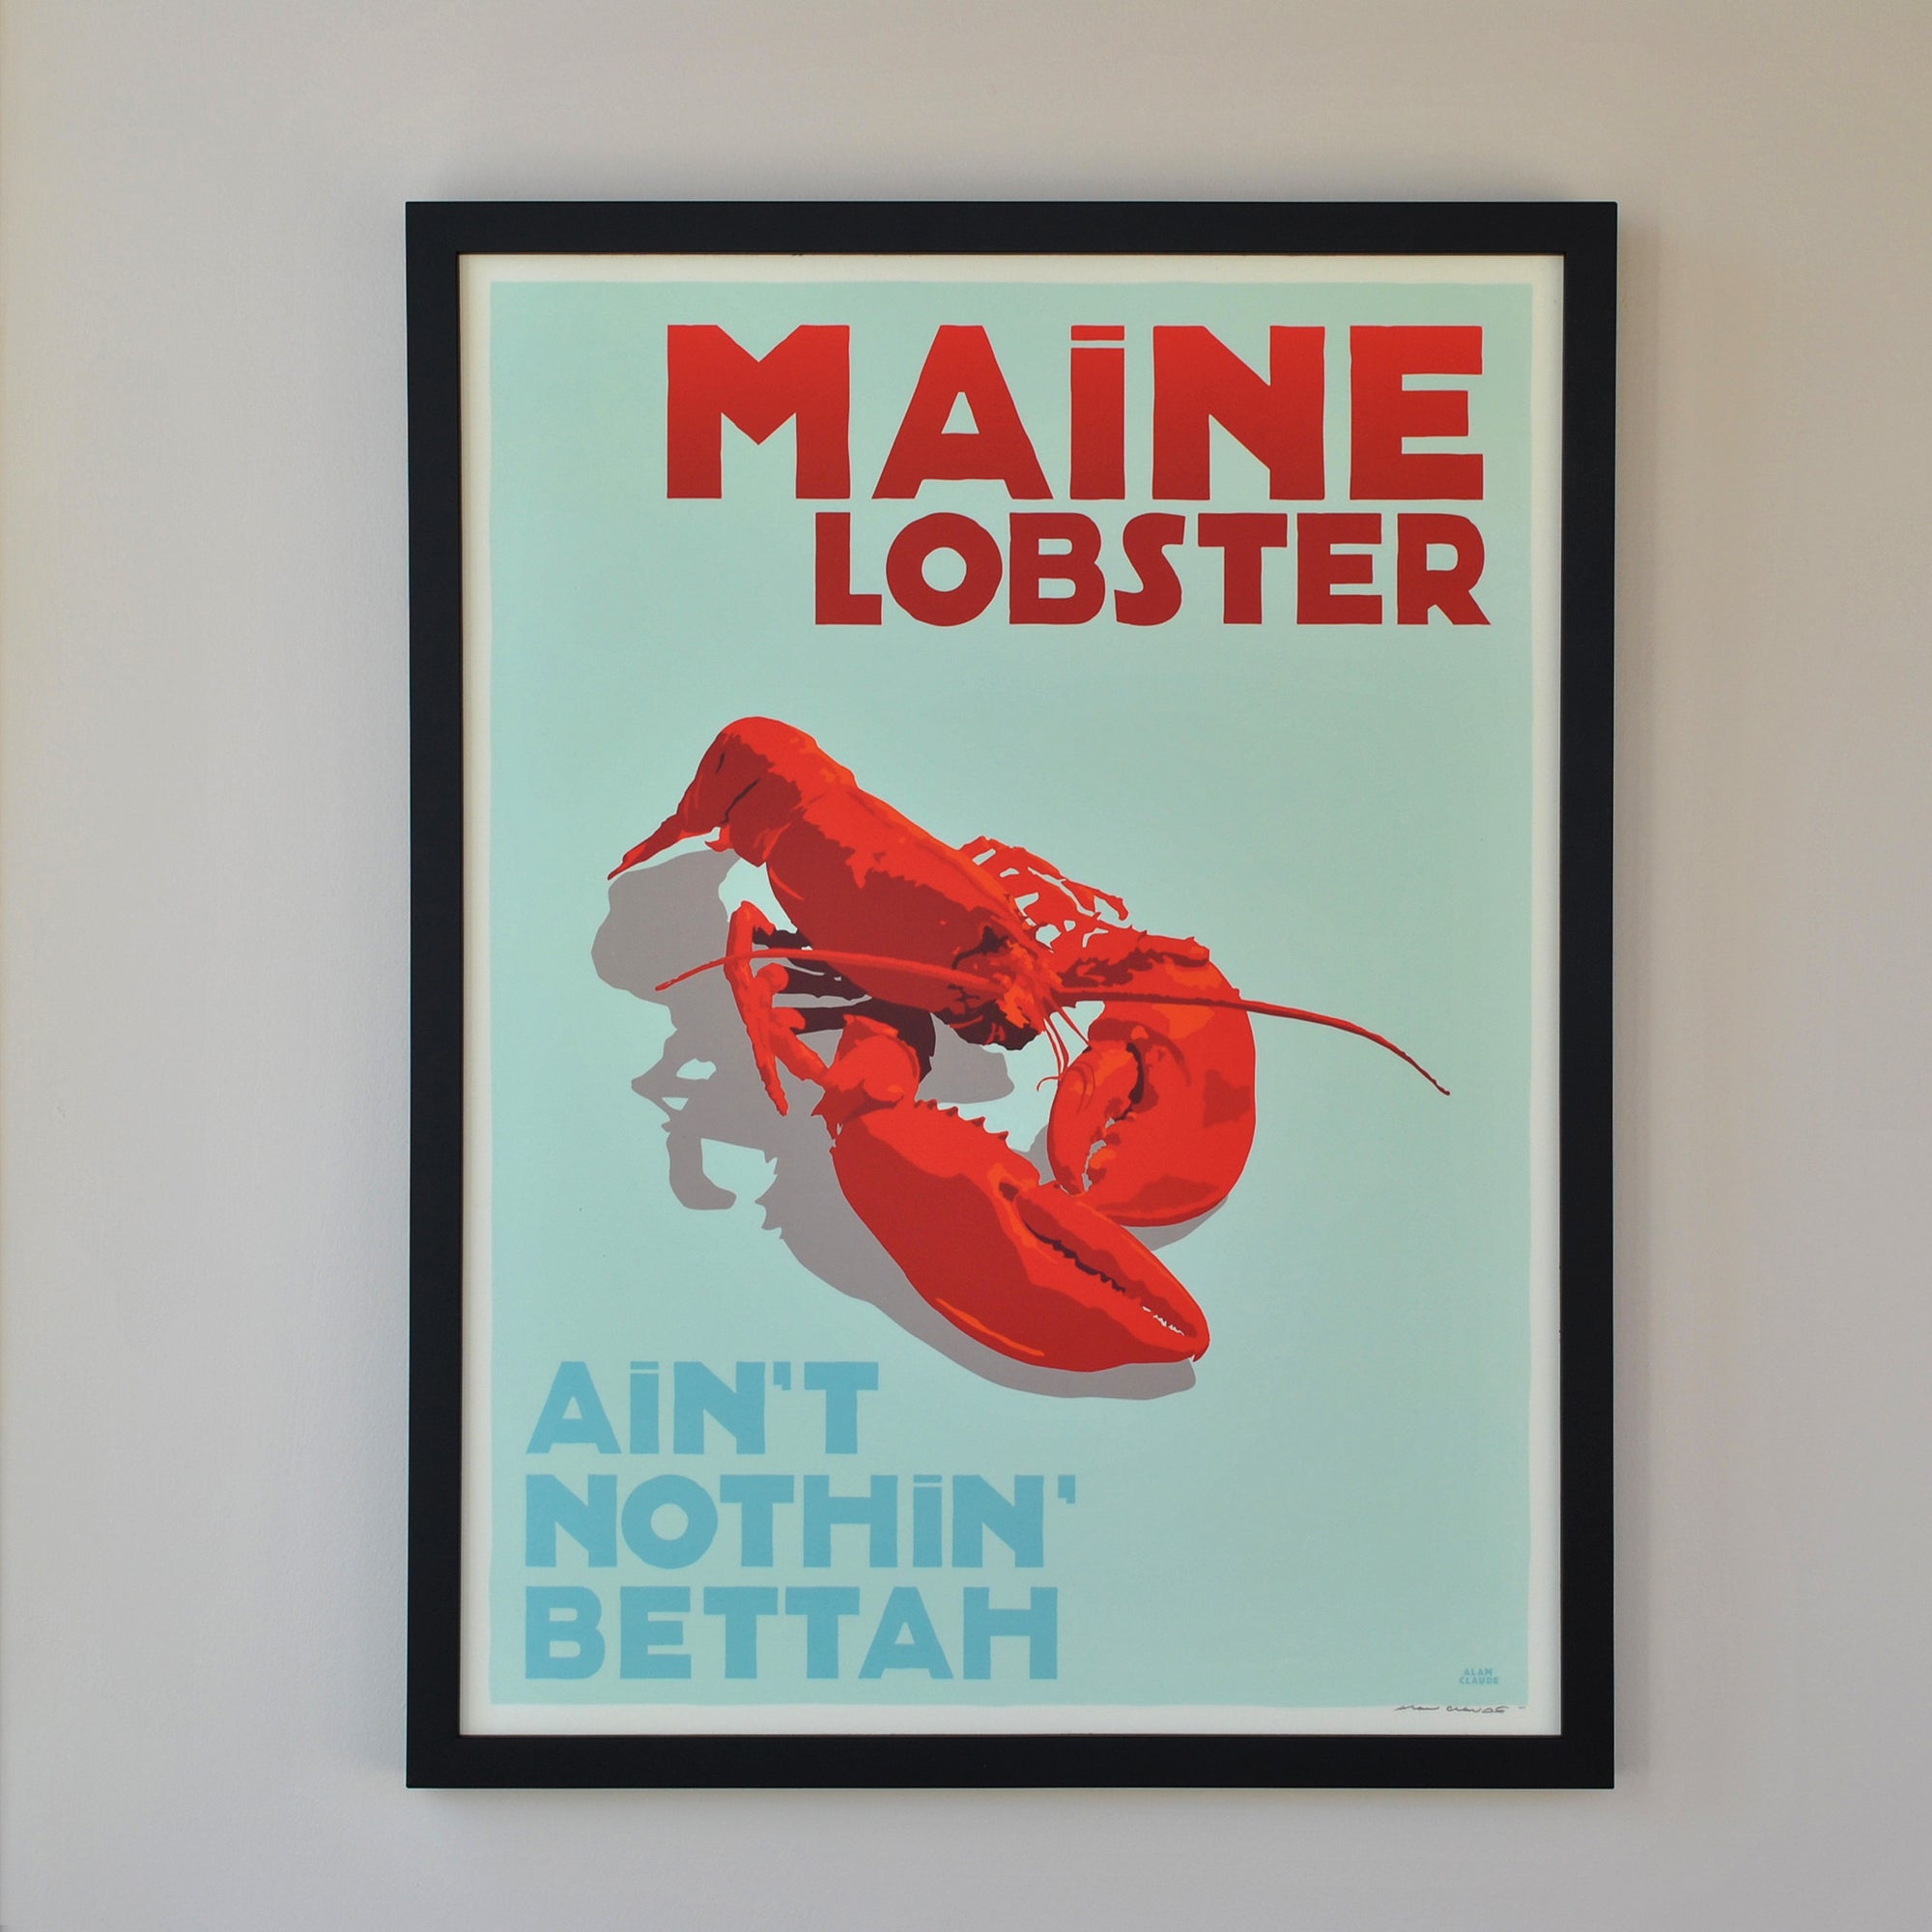 Maine Lobster Art Print 18" x 24" Framed Travel Poster By Alan Claude - Maine